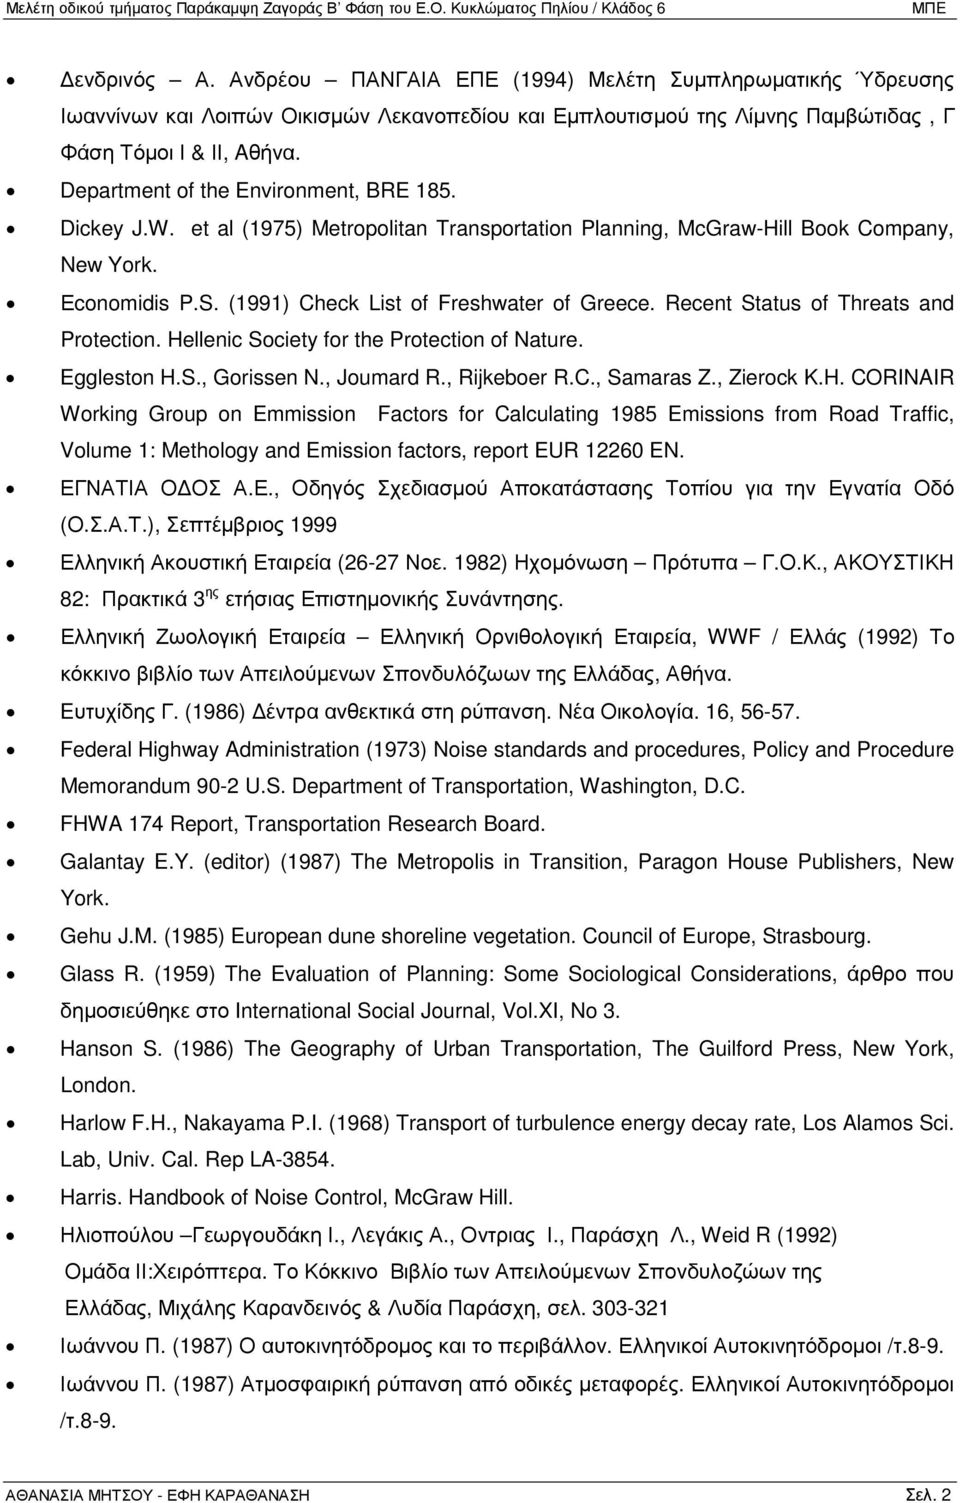 Recent Status of Threats and Protection. Hellenic Society for the Protection of Nature. Eggleston H.S., Gorissen N., Joumard R., Rijkeboer R.C., Samaras Z., Zierock K.H. CORINAIR Working Group on Emmission Factors for Calculating 1985 Emissions from Road Traffic, Volume 1: Methology and Emission factors, report EUR 12260 EN.